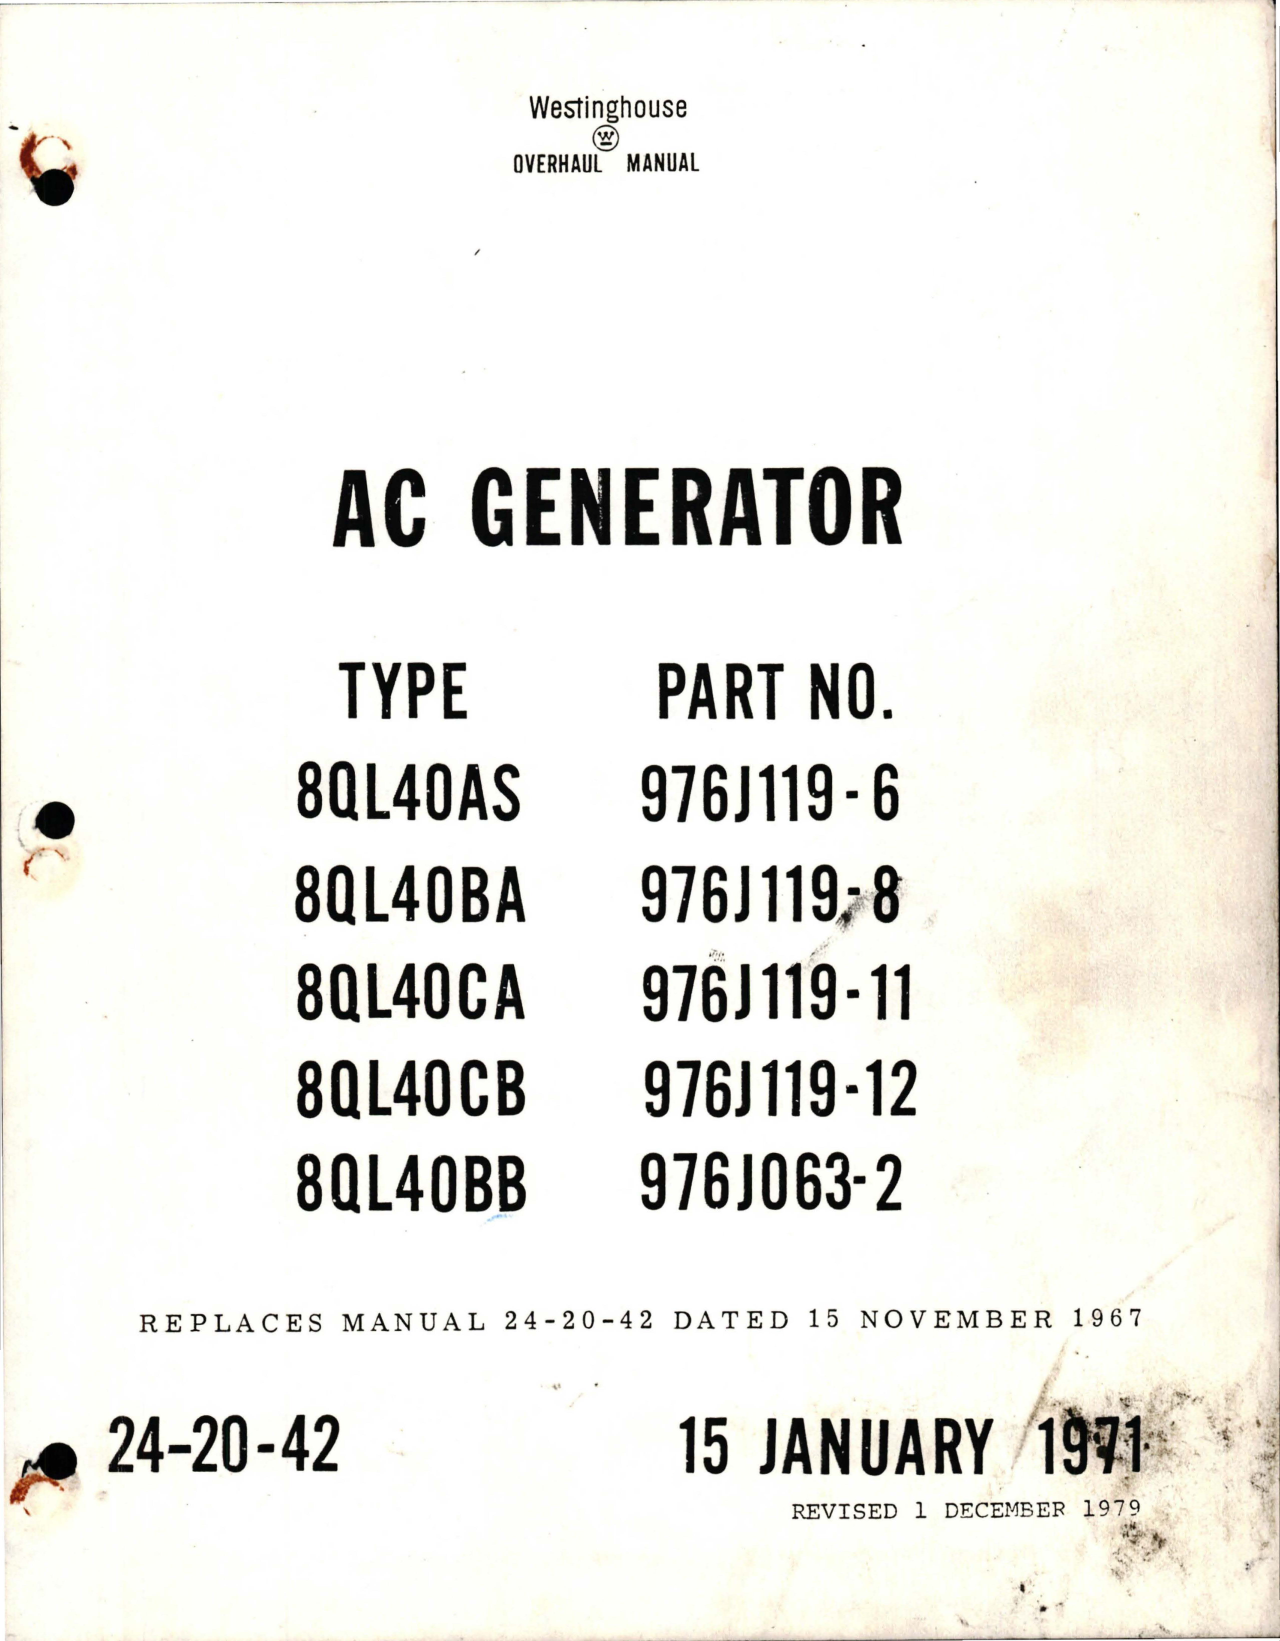 Sample page 1 from AirCorps Library document: Overhaul Manual for AC Generator 